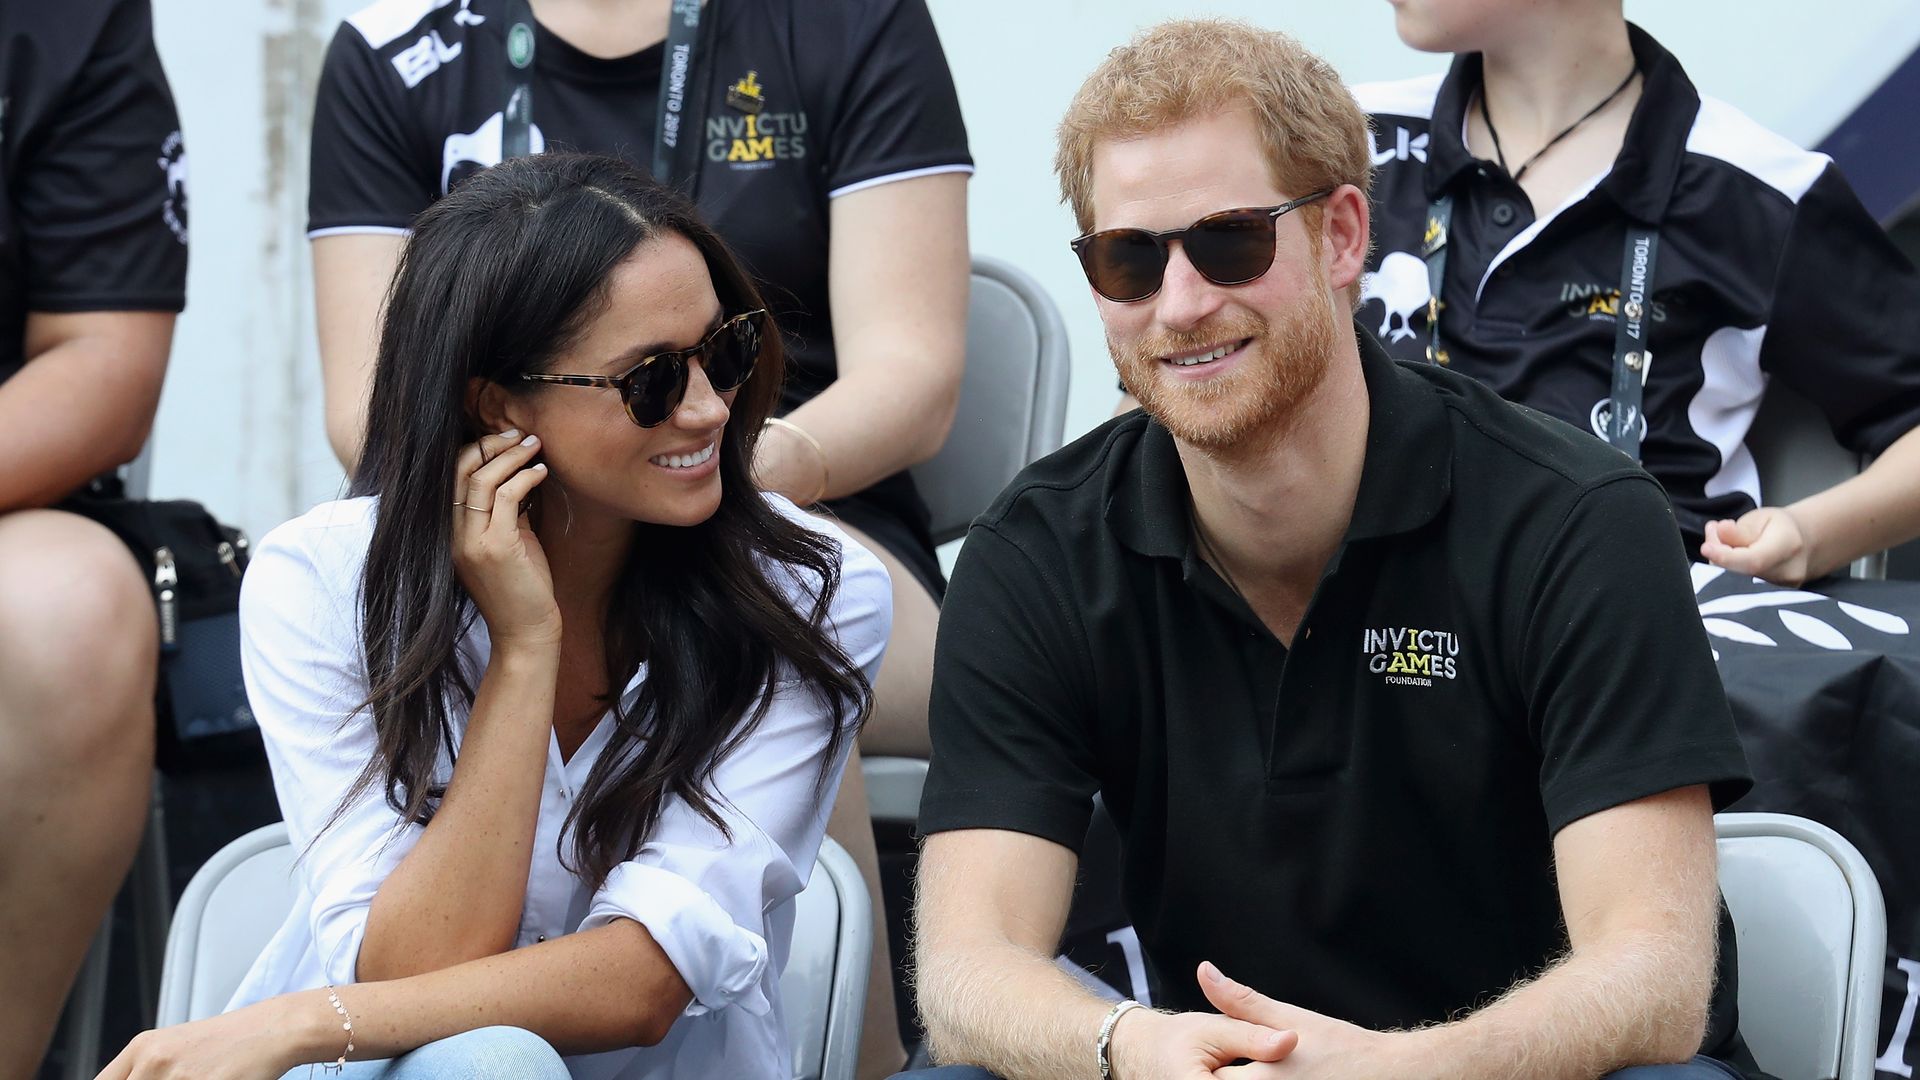 Prince Harry and Meghan Markle's couple debut at Invictus Games watch